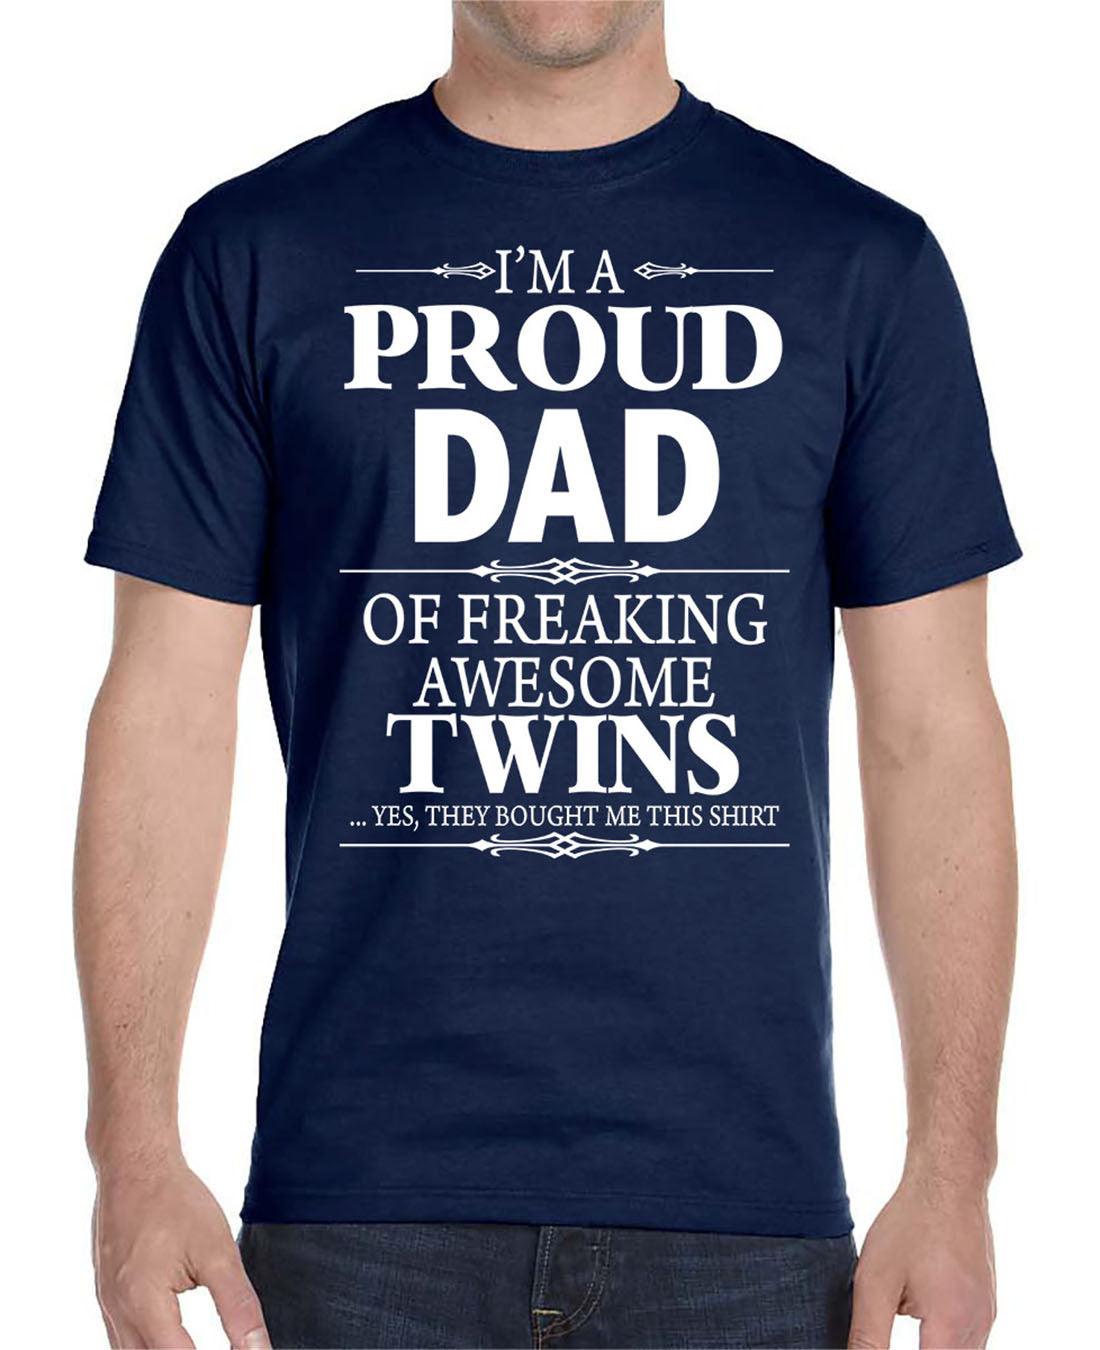 I'm A Proud Dad Of Freaking Awesome Twins - Unisex T-Shirt Dad Shirt - familyteeprints